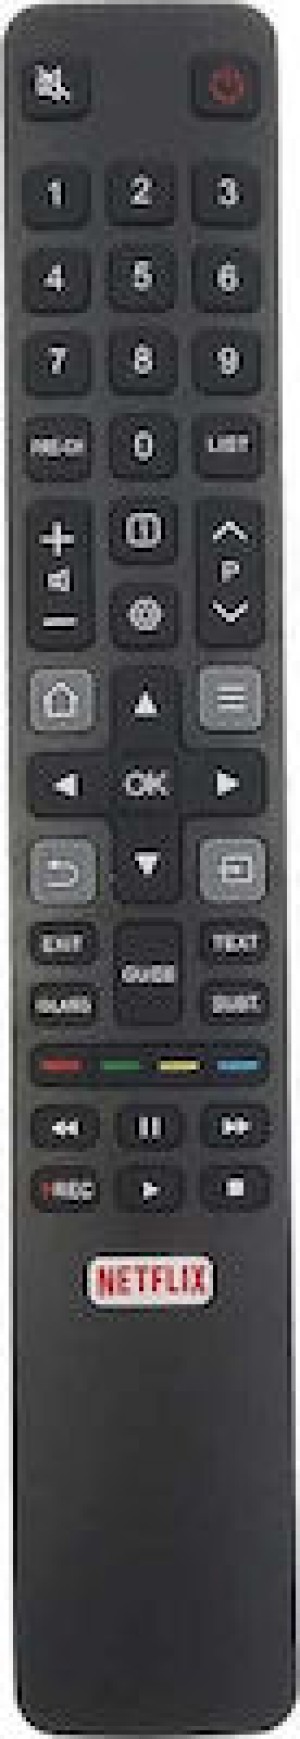 OEM Compatible L1508 TCL/Thomson Remote Control for TCL and Thomson TVs